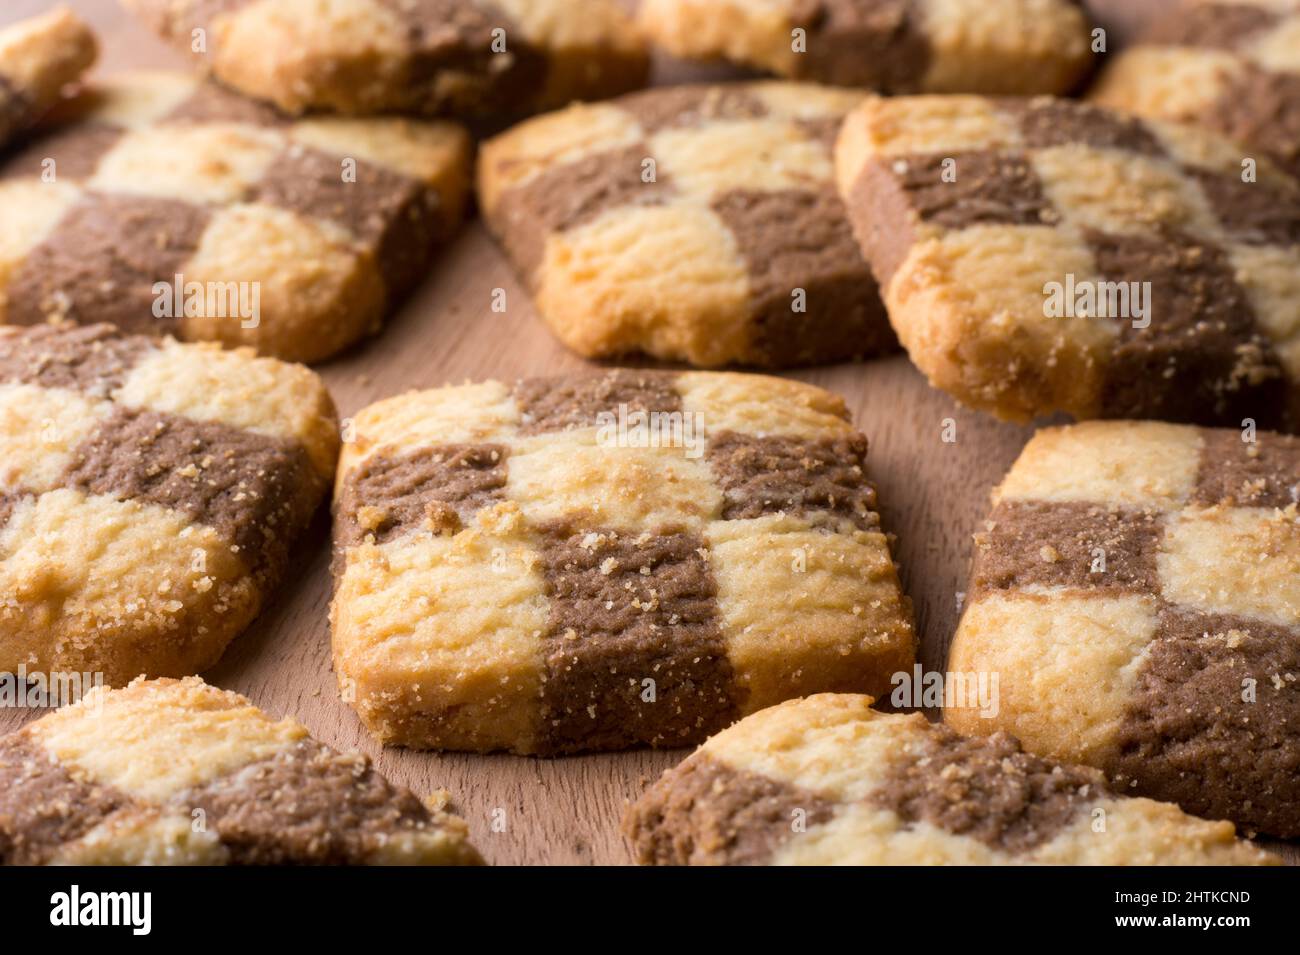 chequered biscuits, closeup view of cookies, square shape snack taken in shallow depth of field Stock Photo